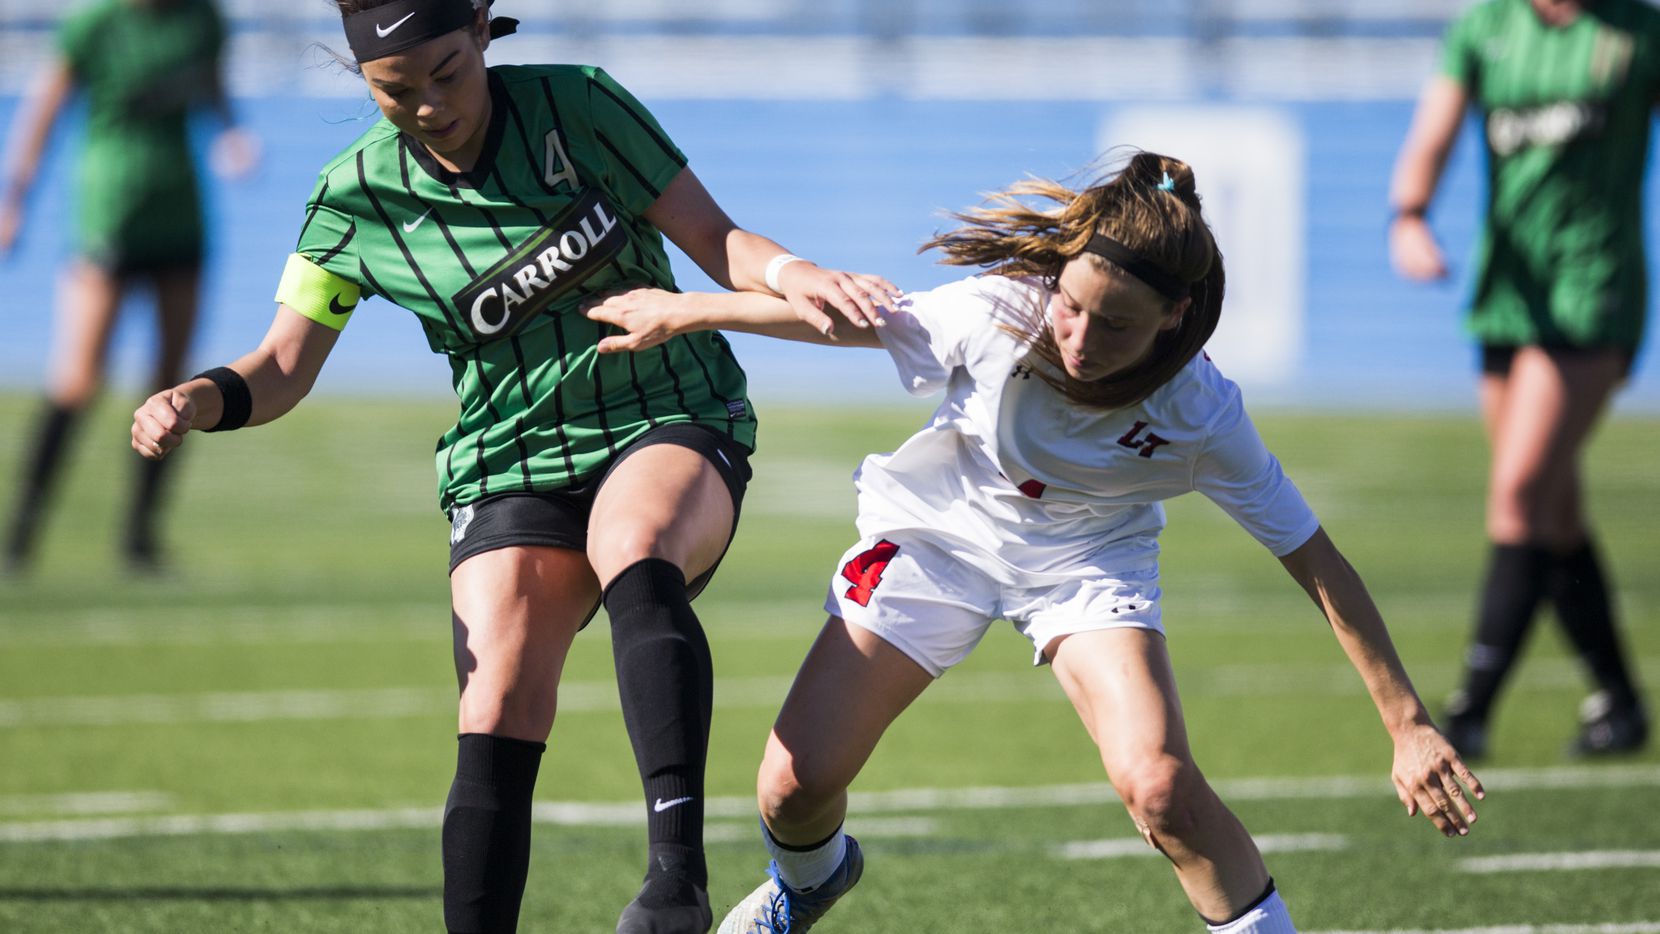 Southlake Carroll forward Taylor Tufts (4) takes the ball from Austin Lake Travis defender Bronwyn Bates (4) during the first half of a UIL conference 6A girls state semifinal soccer game between Southlake Carroll High School and Lake Travis High School on Friday, April 19, 2019 at Birkelbach Field in Georgetown, Texas. (Ashley Landis/The Dallas Morning News)